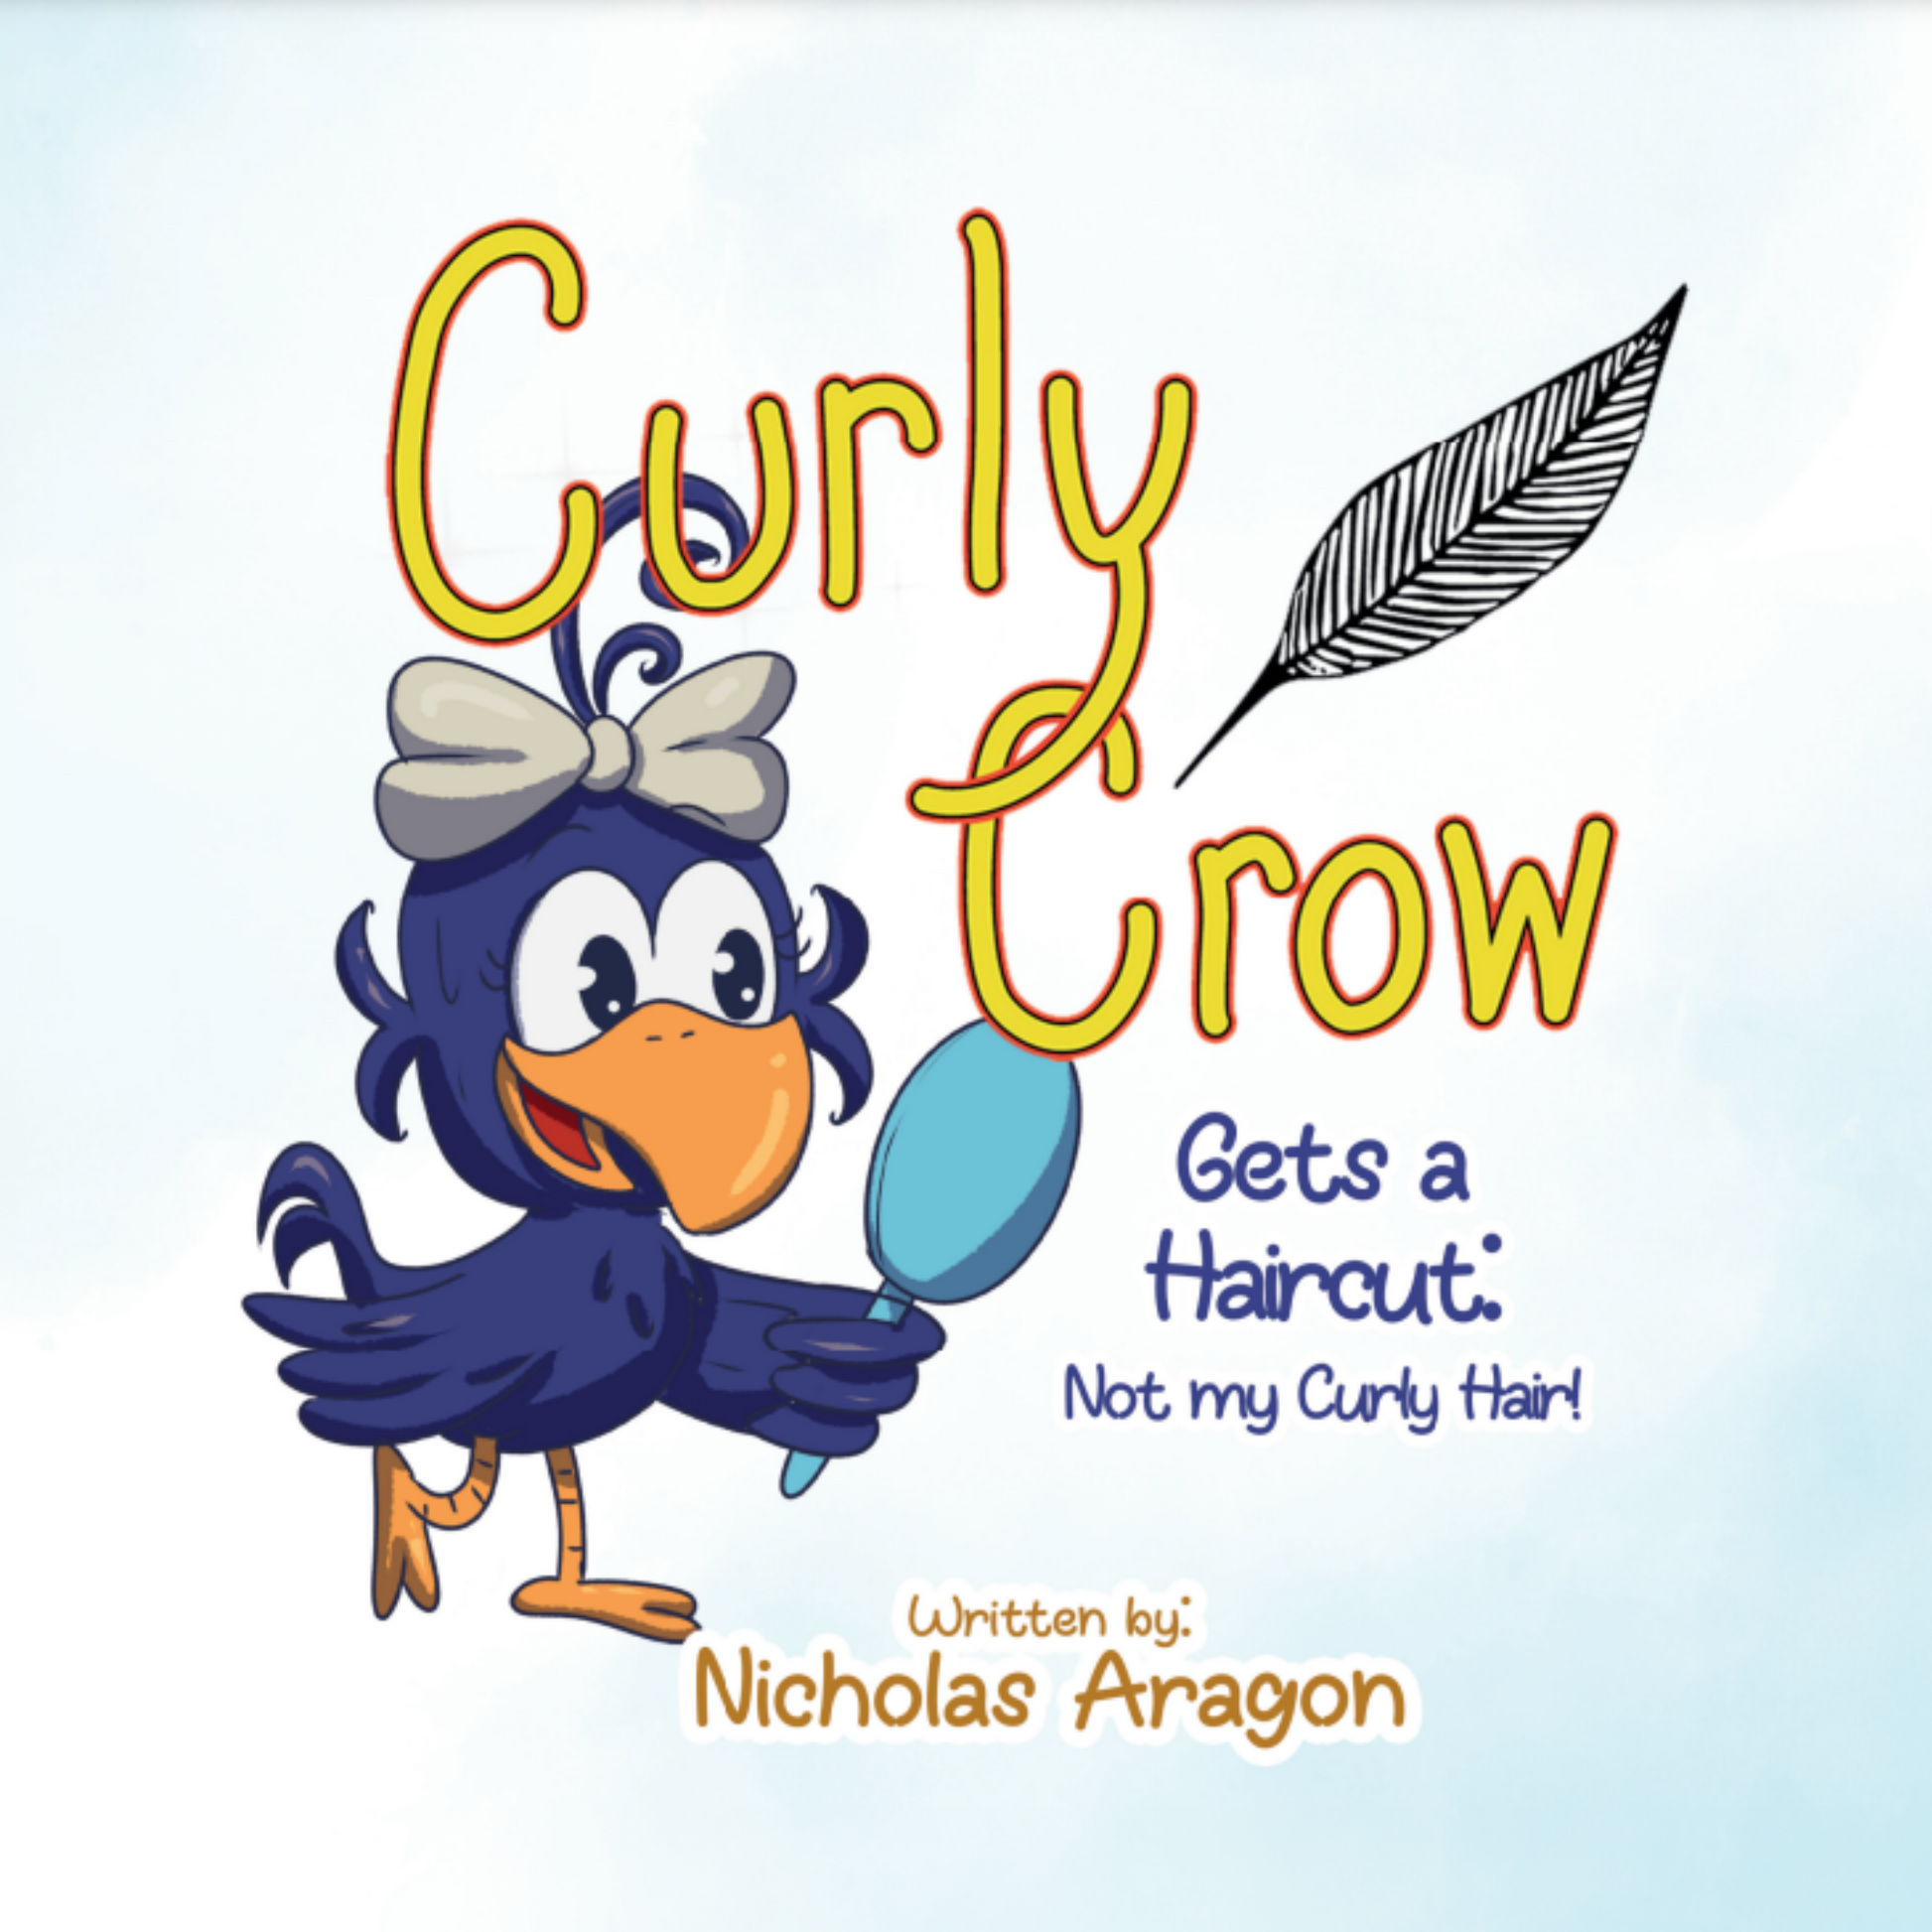 Curly Crow Children's Book Cover page - Identity and Trust